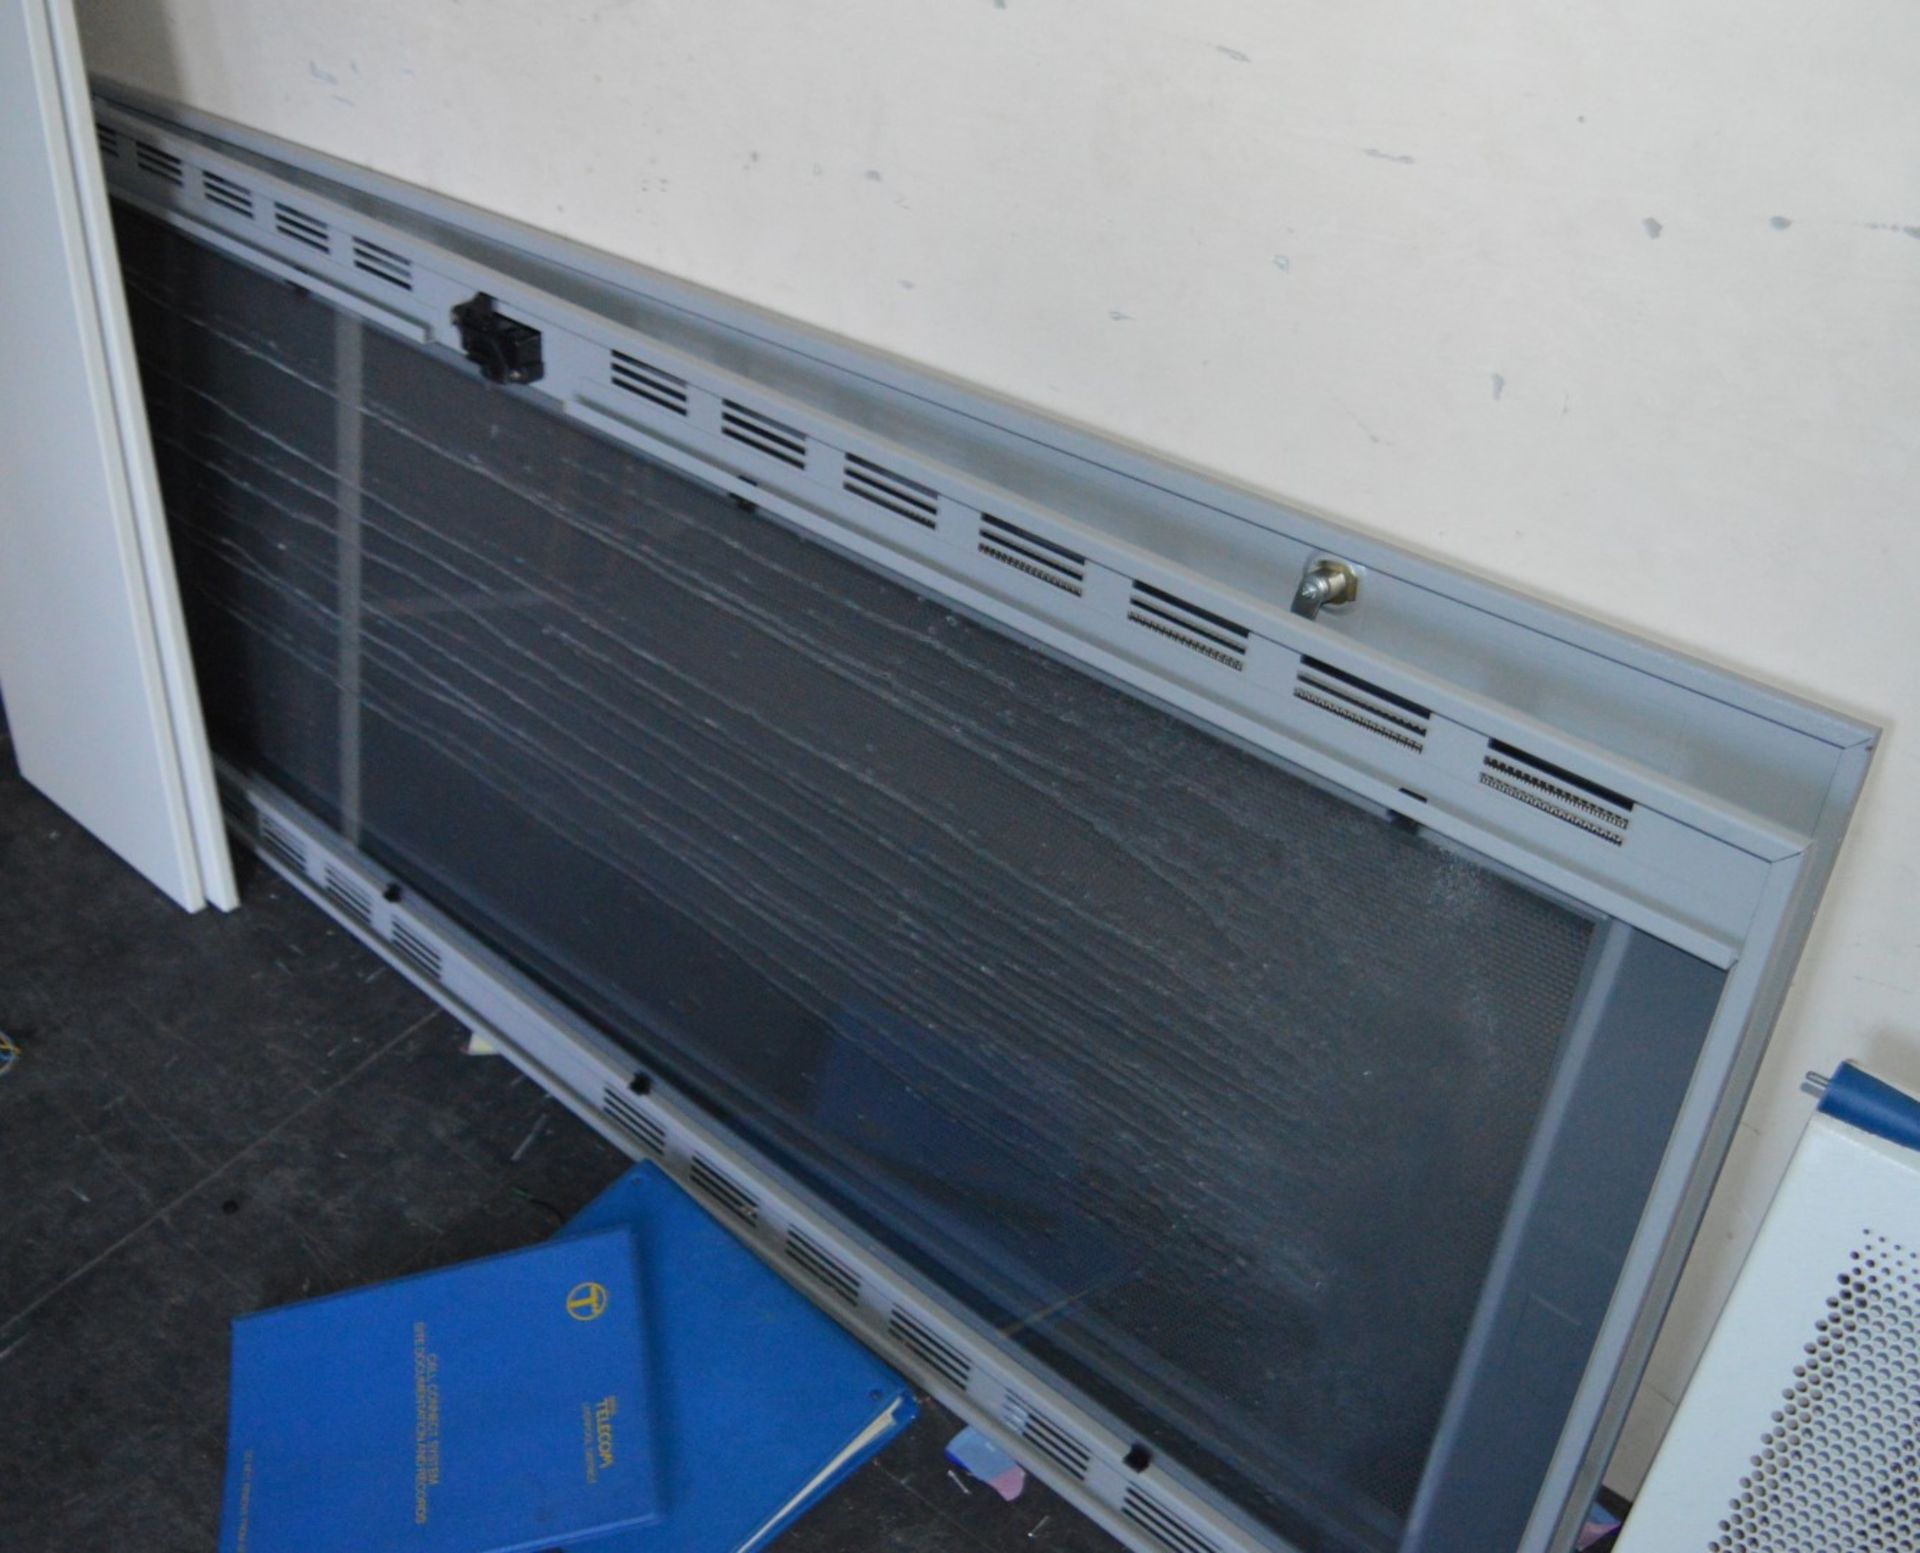 2 x Server Cabinet Enclosures - H215 x W80 x D100 cms - Includes Fronts But No Backs or Sides - - Image 7 of 9